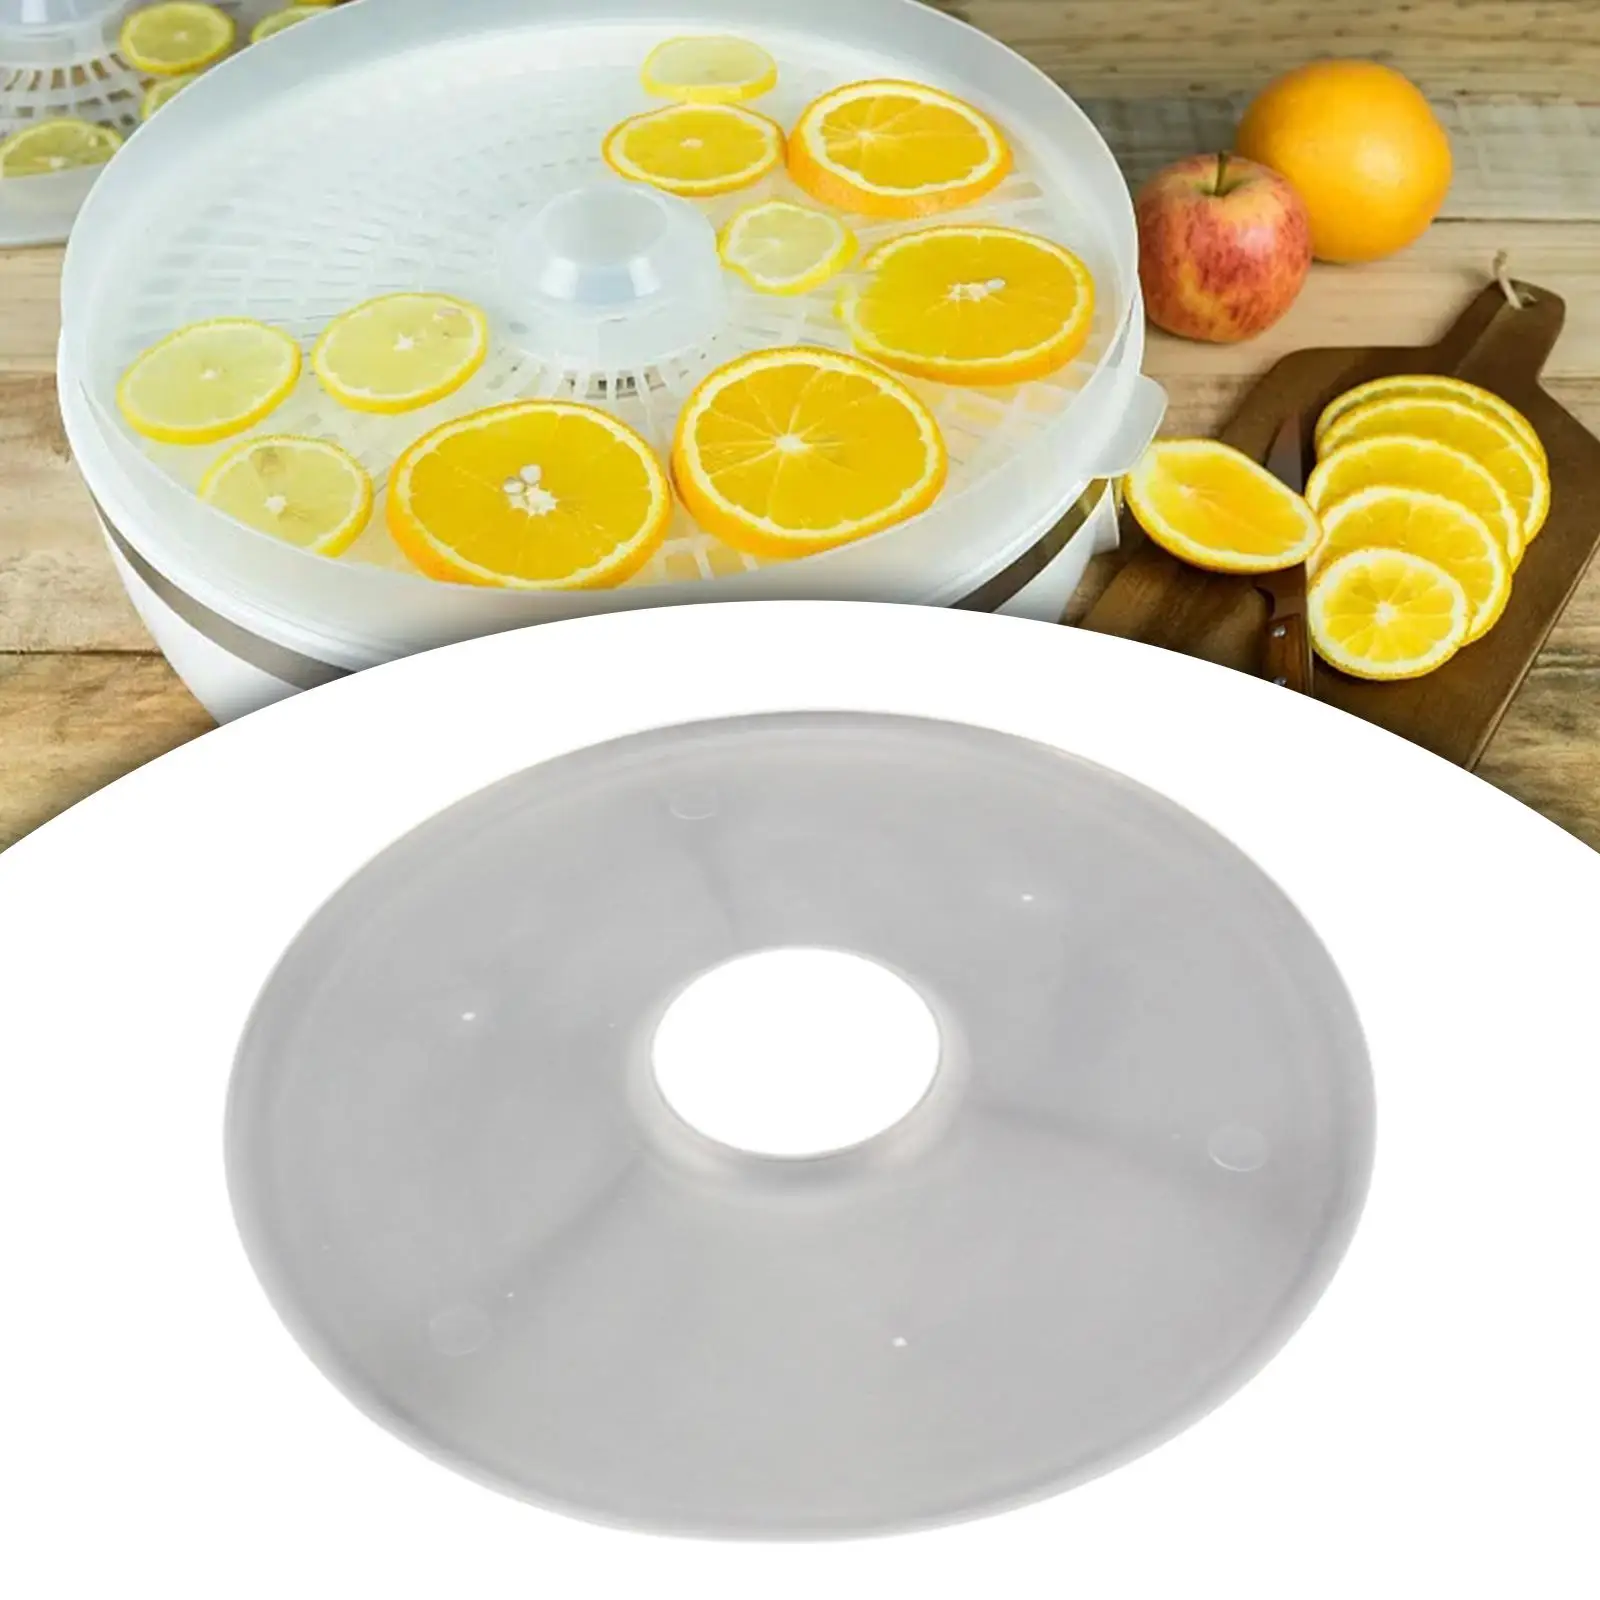 Electric Food Dryer Mats Water Tray Kitchen Fruit Dryer Tray round Dehydrator Roll up Sheet for FD-660 Fruit Drying Machine